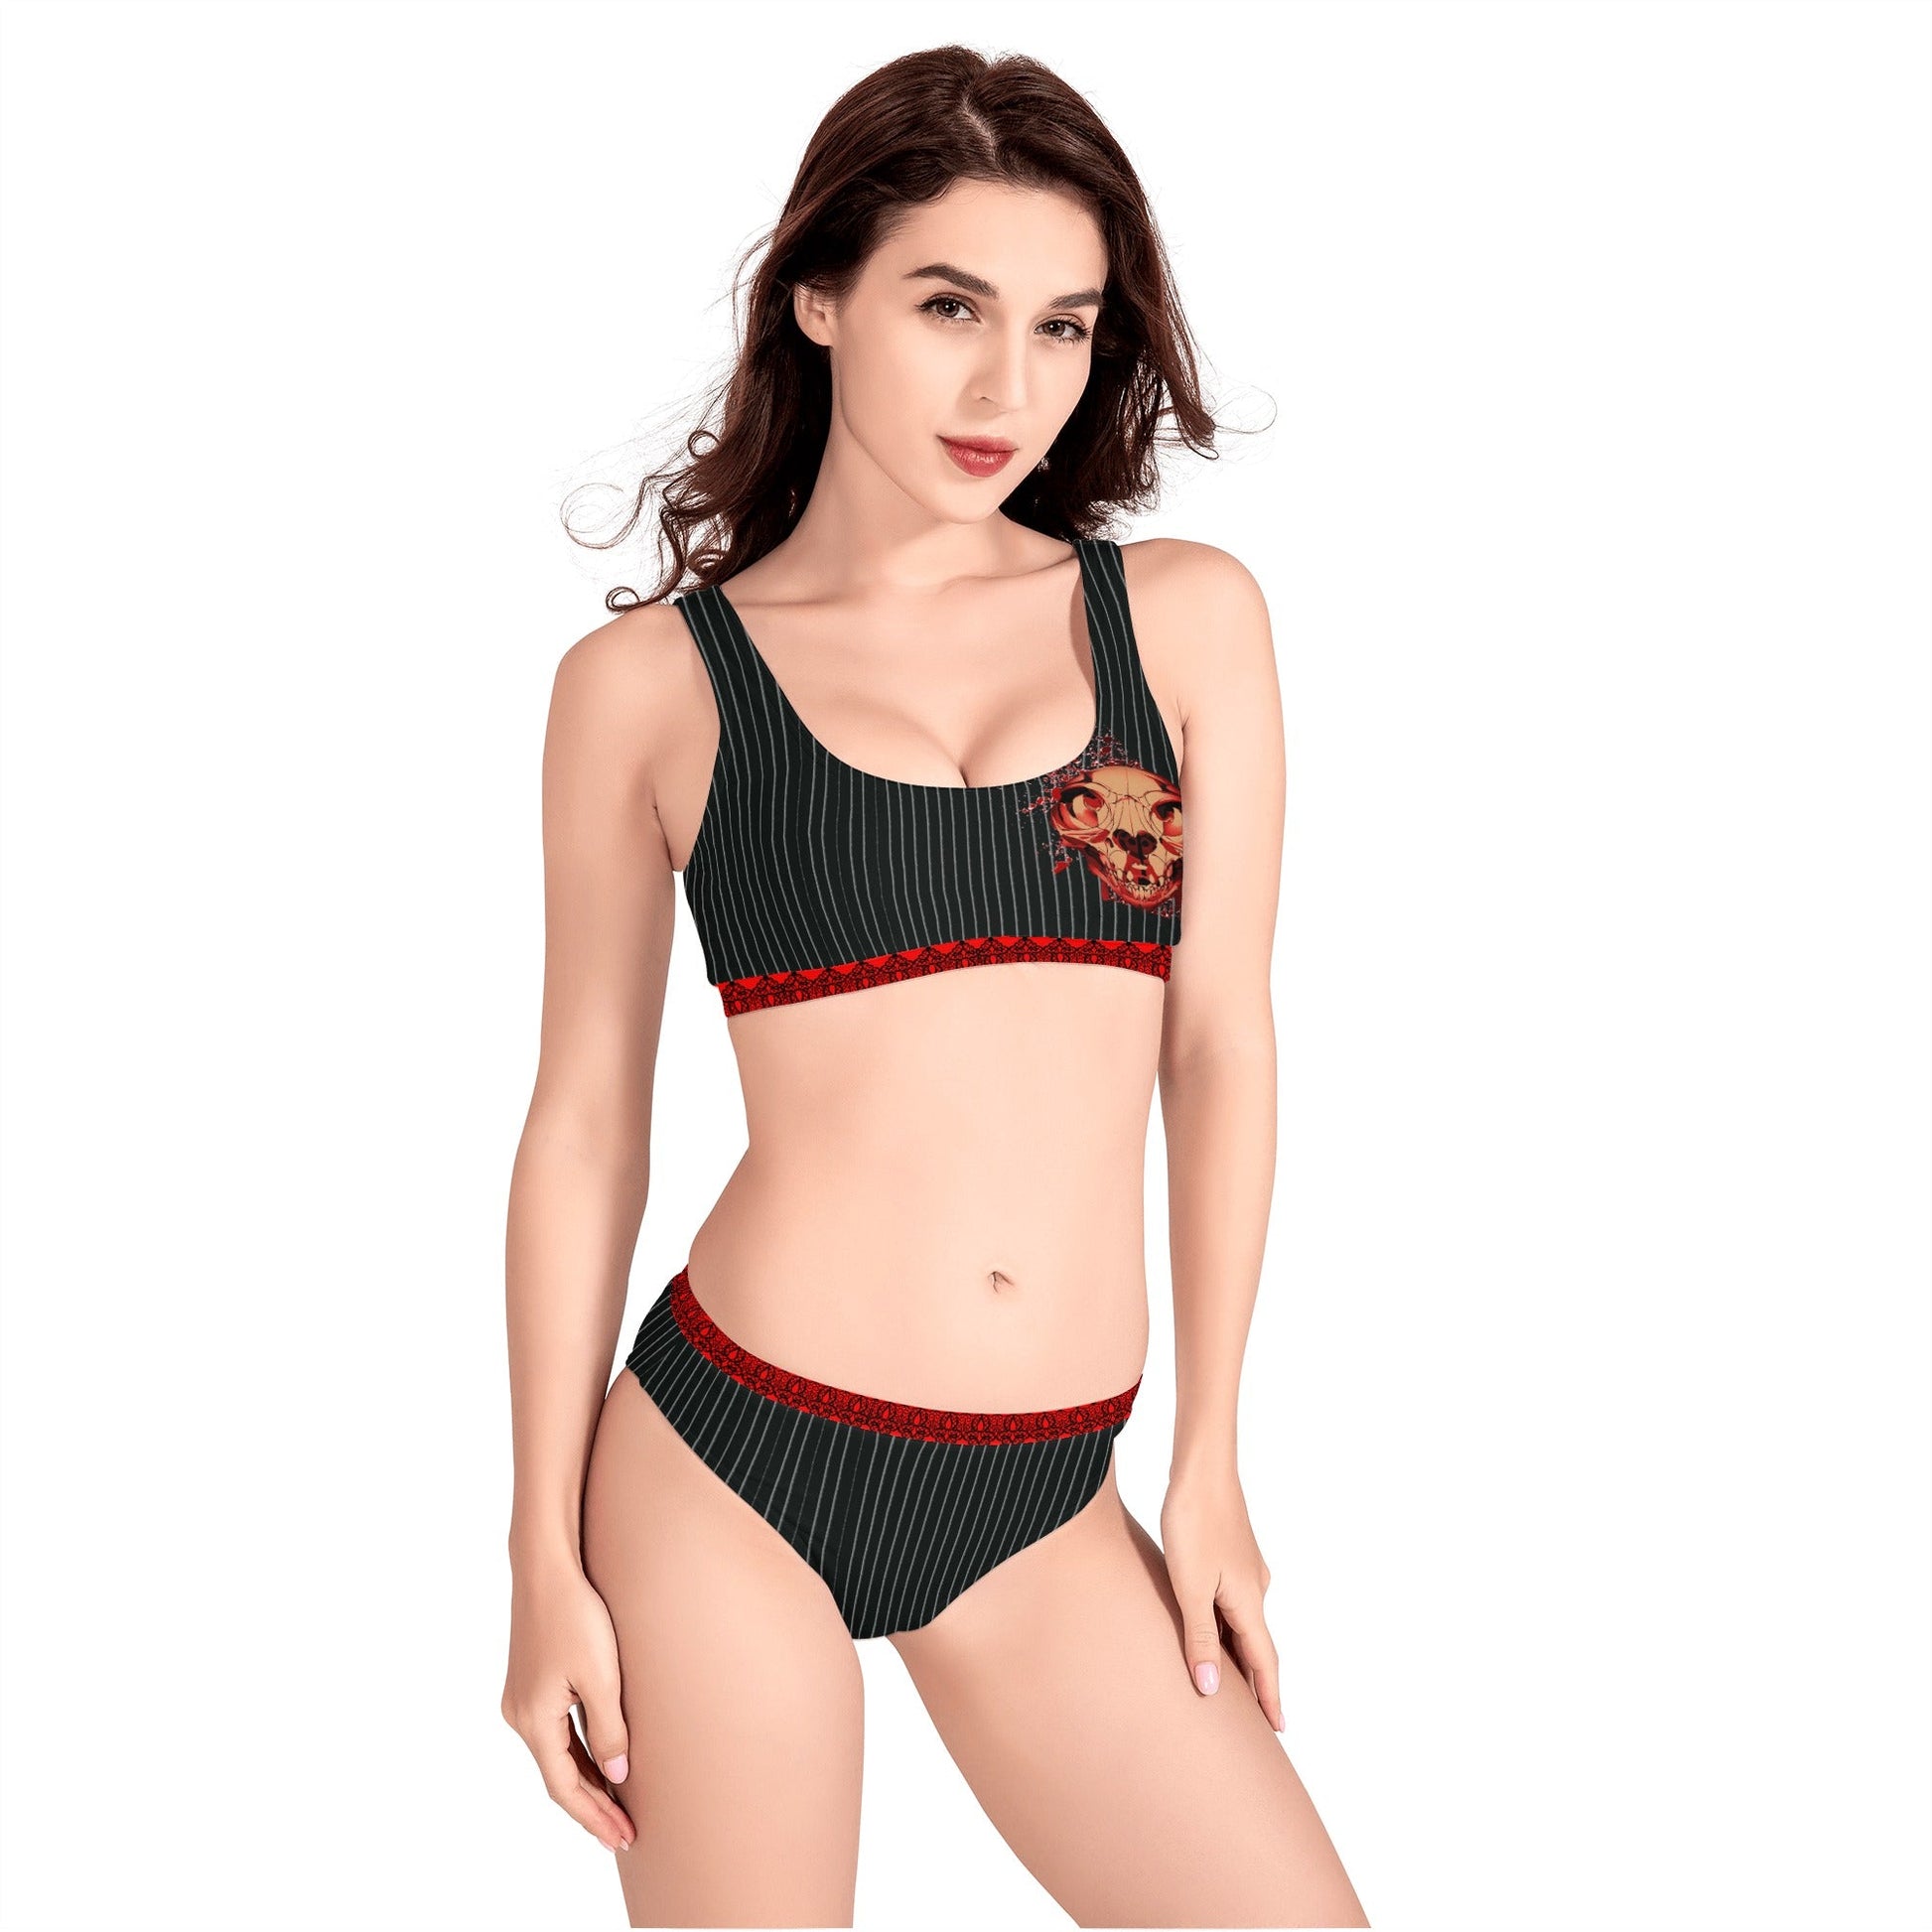 Stand out  with the  Pinstriped Women's Sport Bikinis Swimsuit  available at Hey Nugget. Grab yours today!